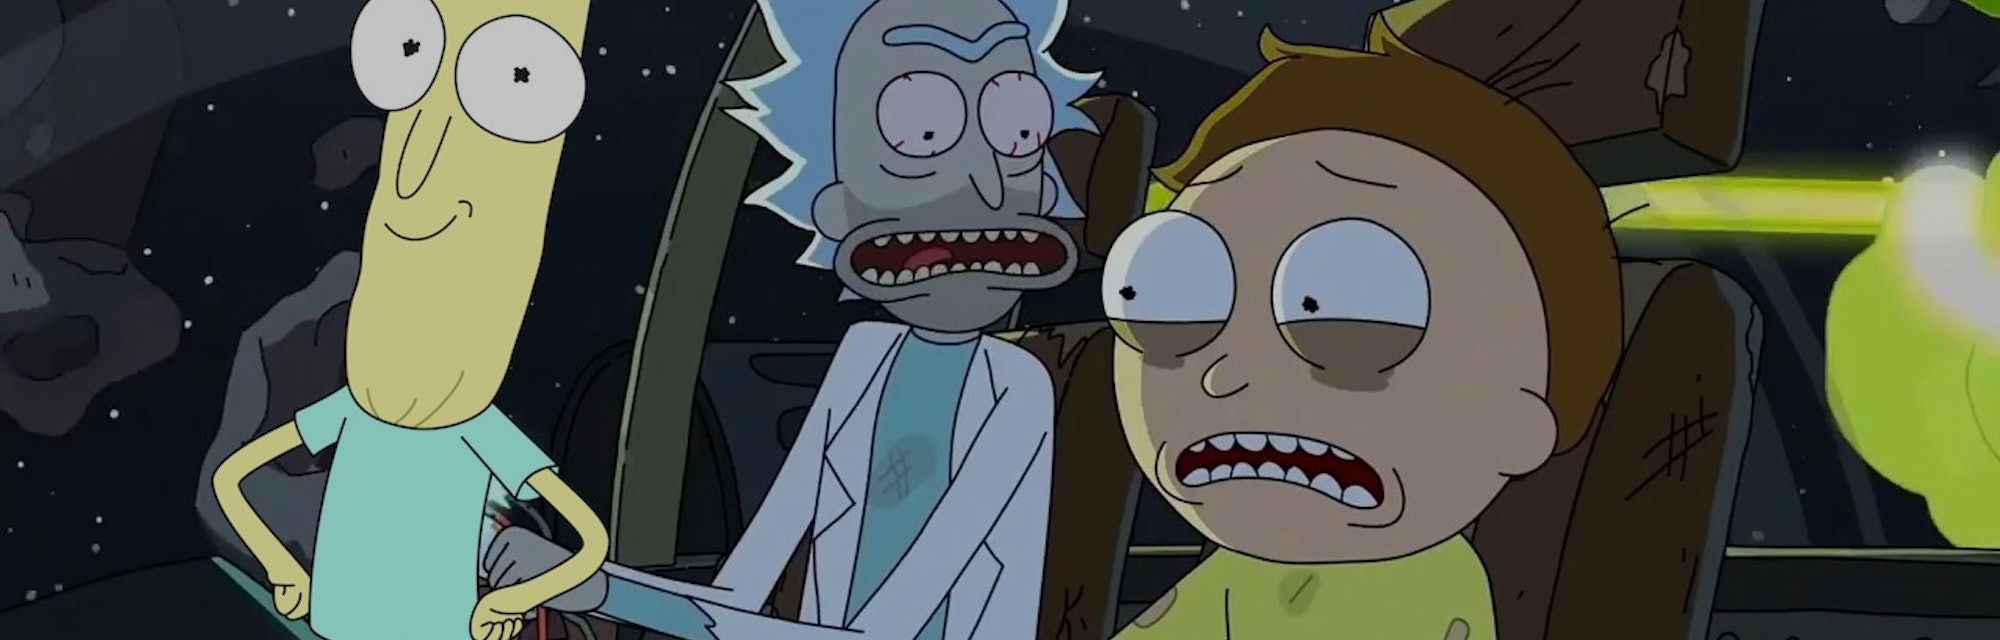 Download Rick And Morty Season 3 Isn T Over Insane Fan Theory Claims SVG Cut Files